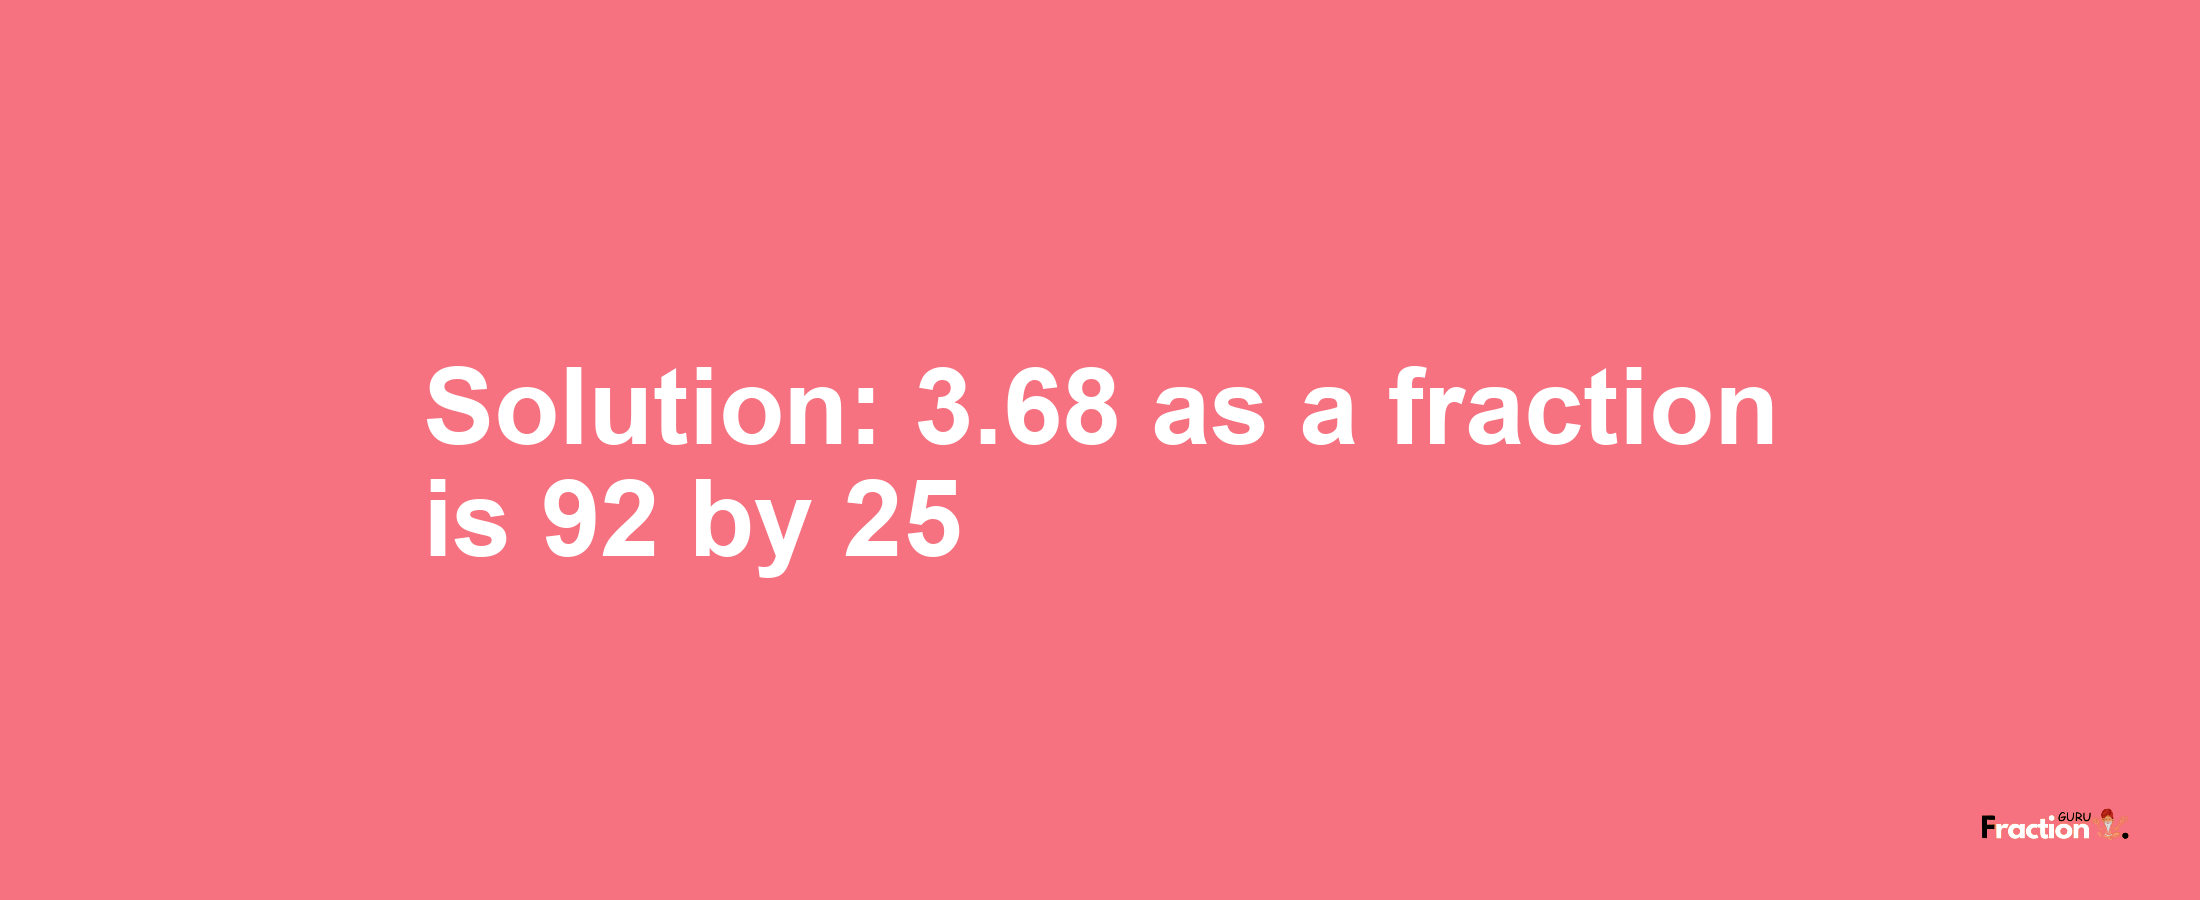 Solution:3.68 as a fraction is 92/25